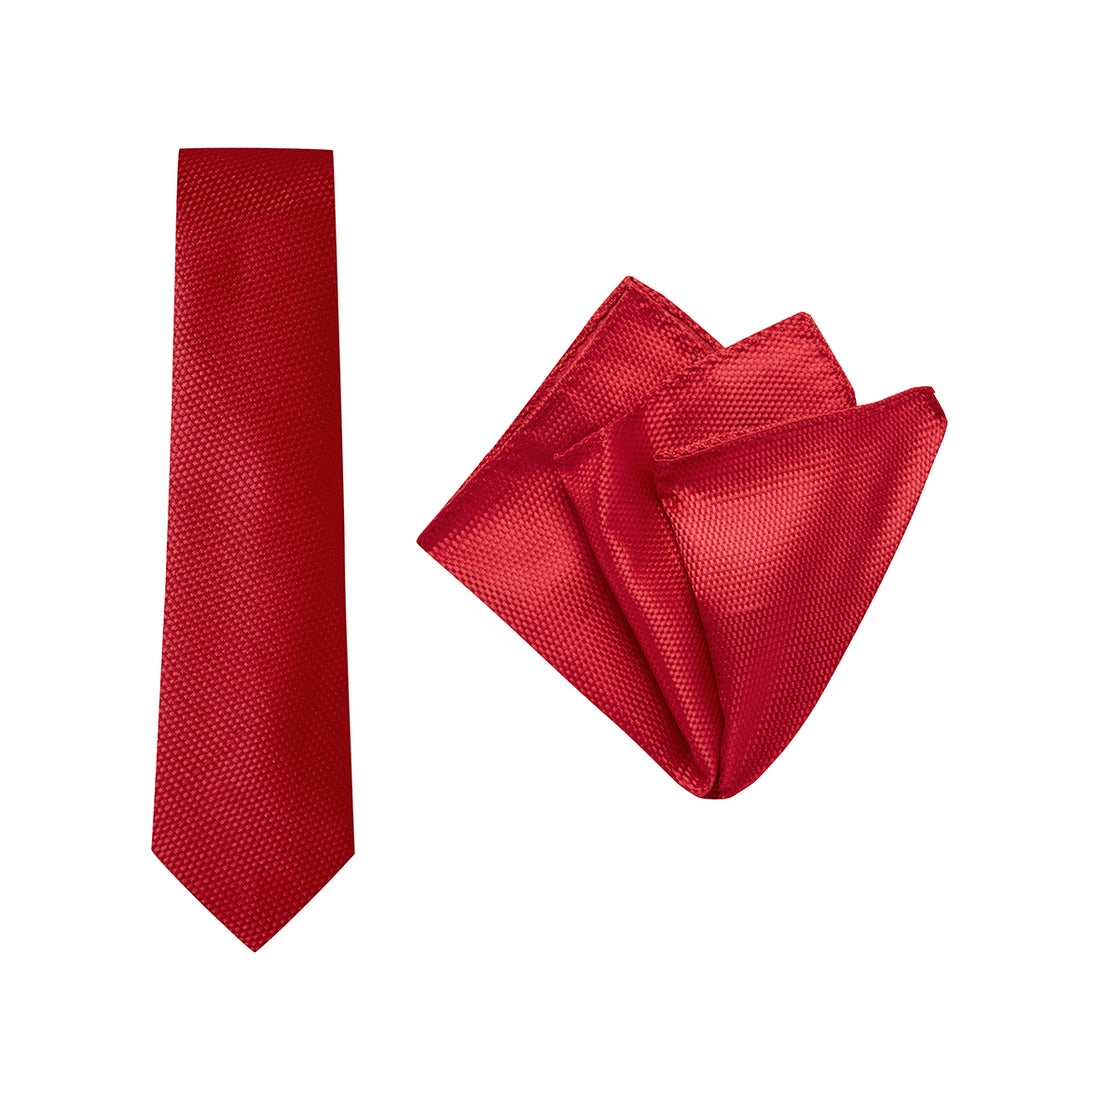 TIE + POCKET SQUARE SET. Carbon. Red. Supplied with matching pocket square.-Ties-PEROZ Accessories